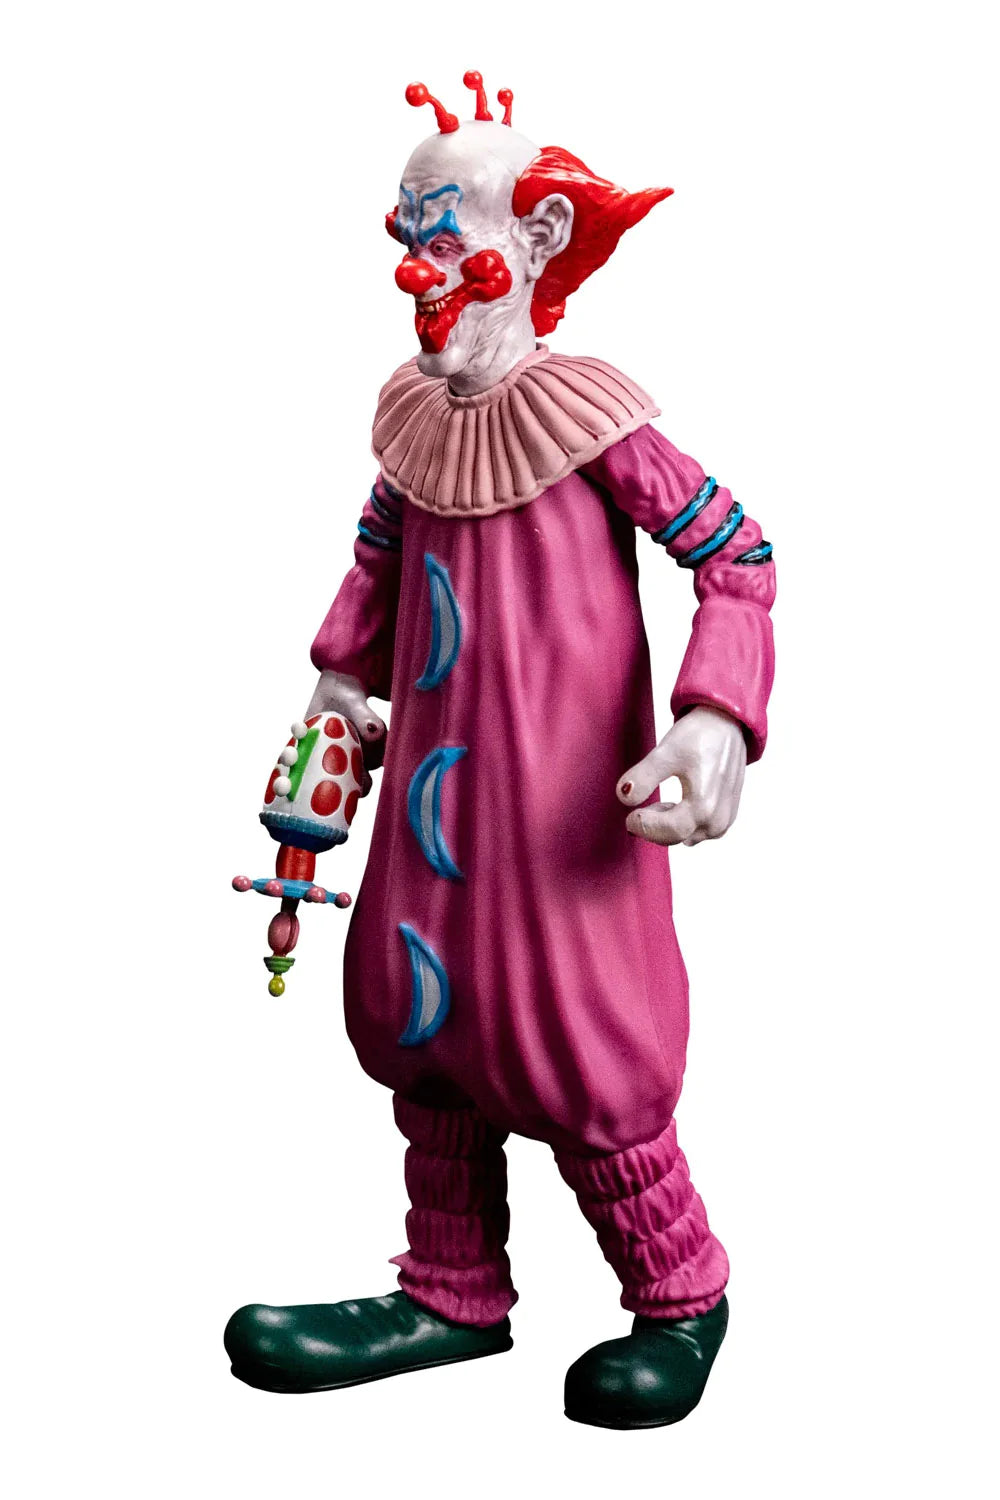 Killer Klowns from Outer Space: Slim (Scream Greats) - 8" Action Figure: